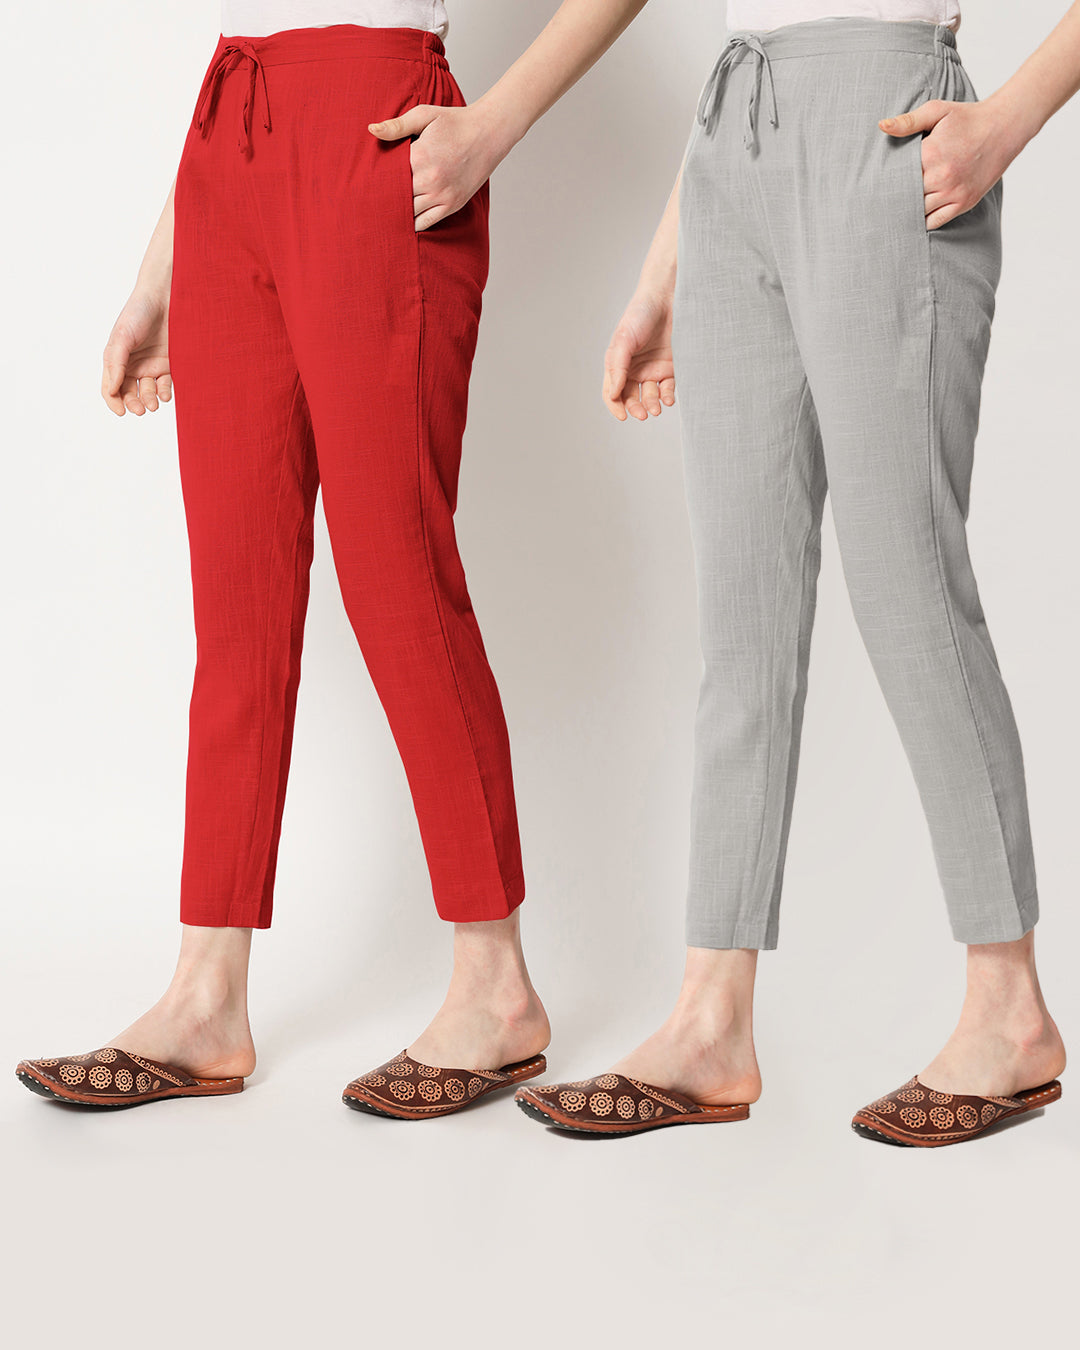 Combo: Classic Red & Iced Grey Cigarette Pants- Set of 2